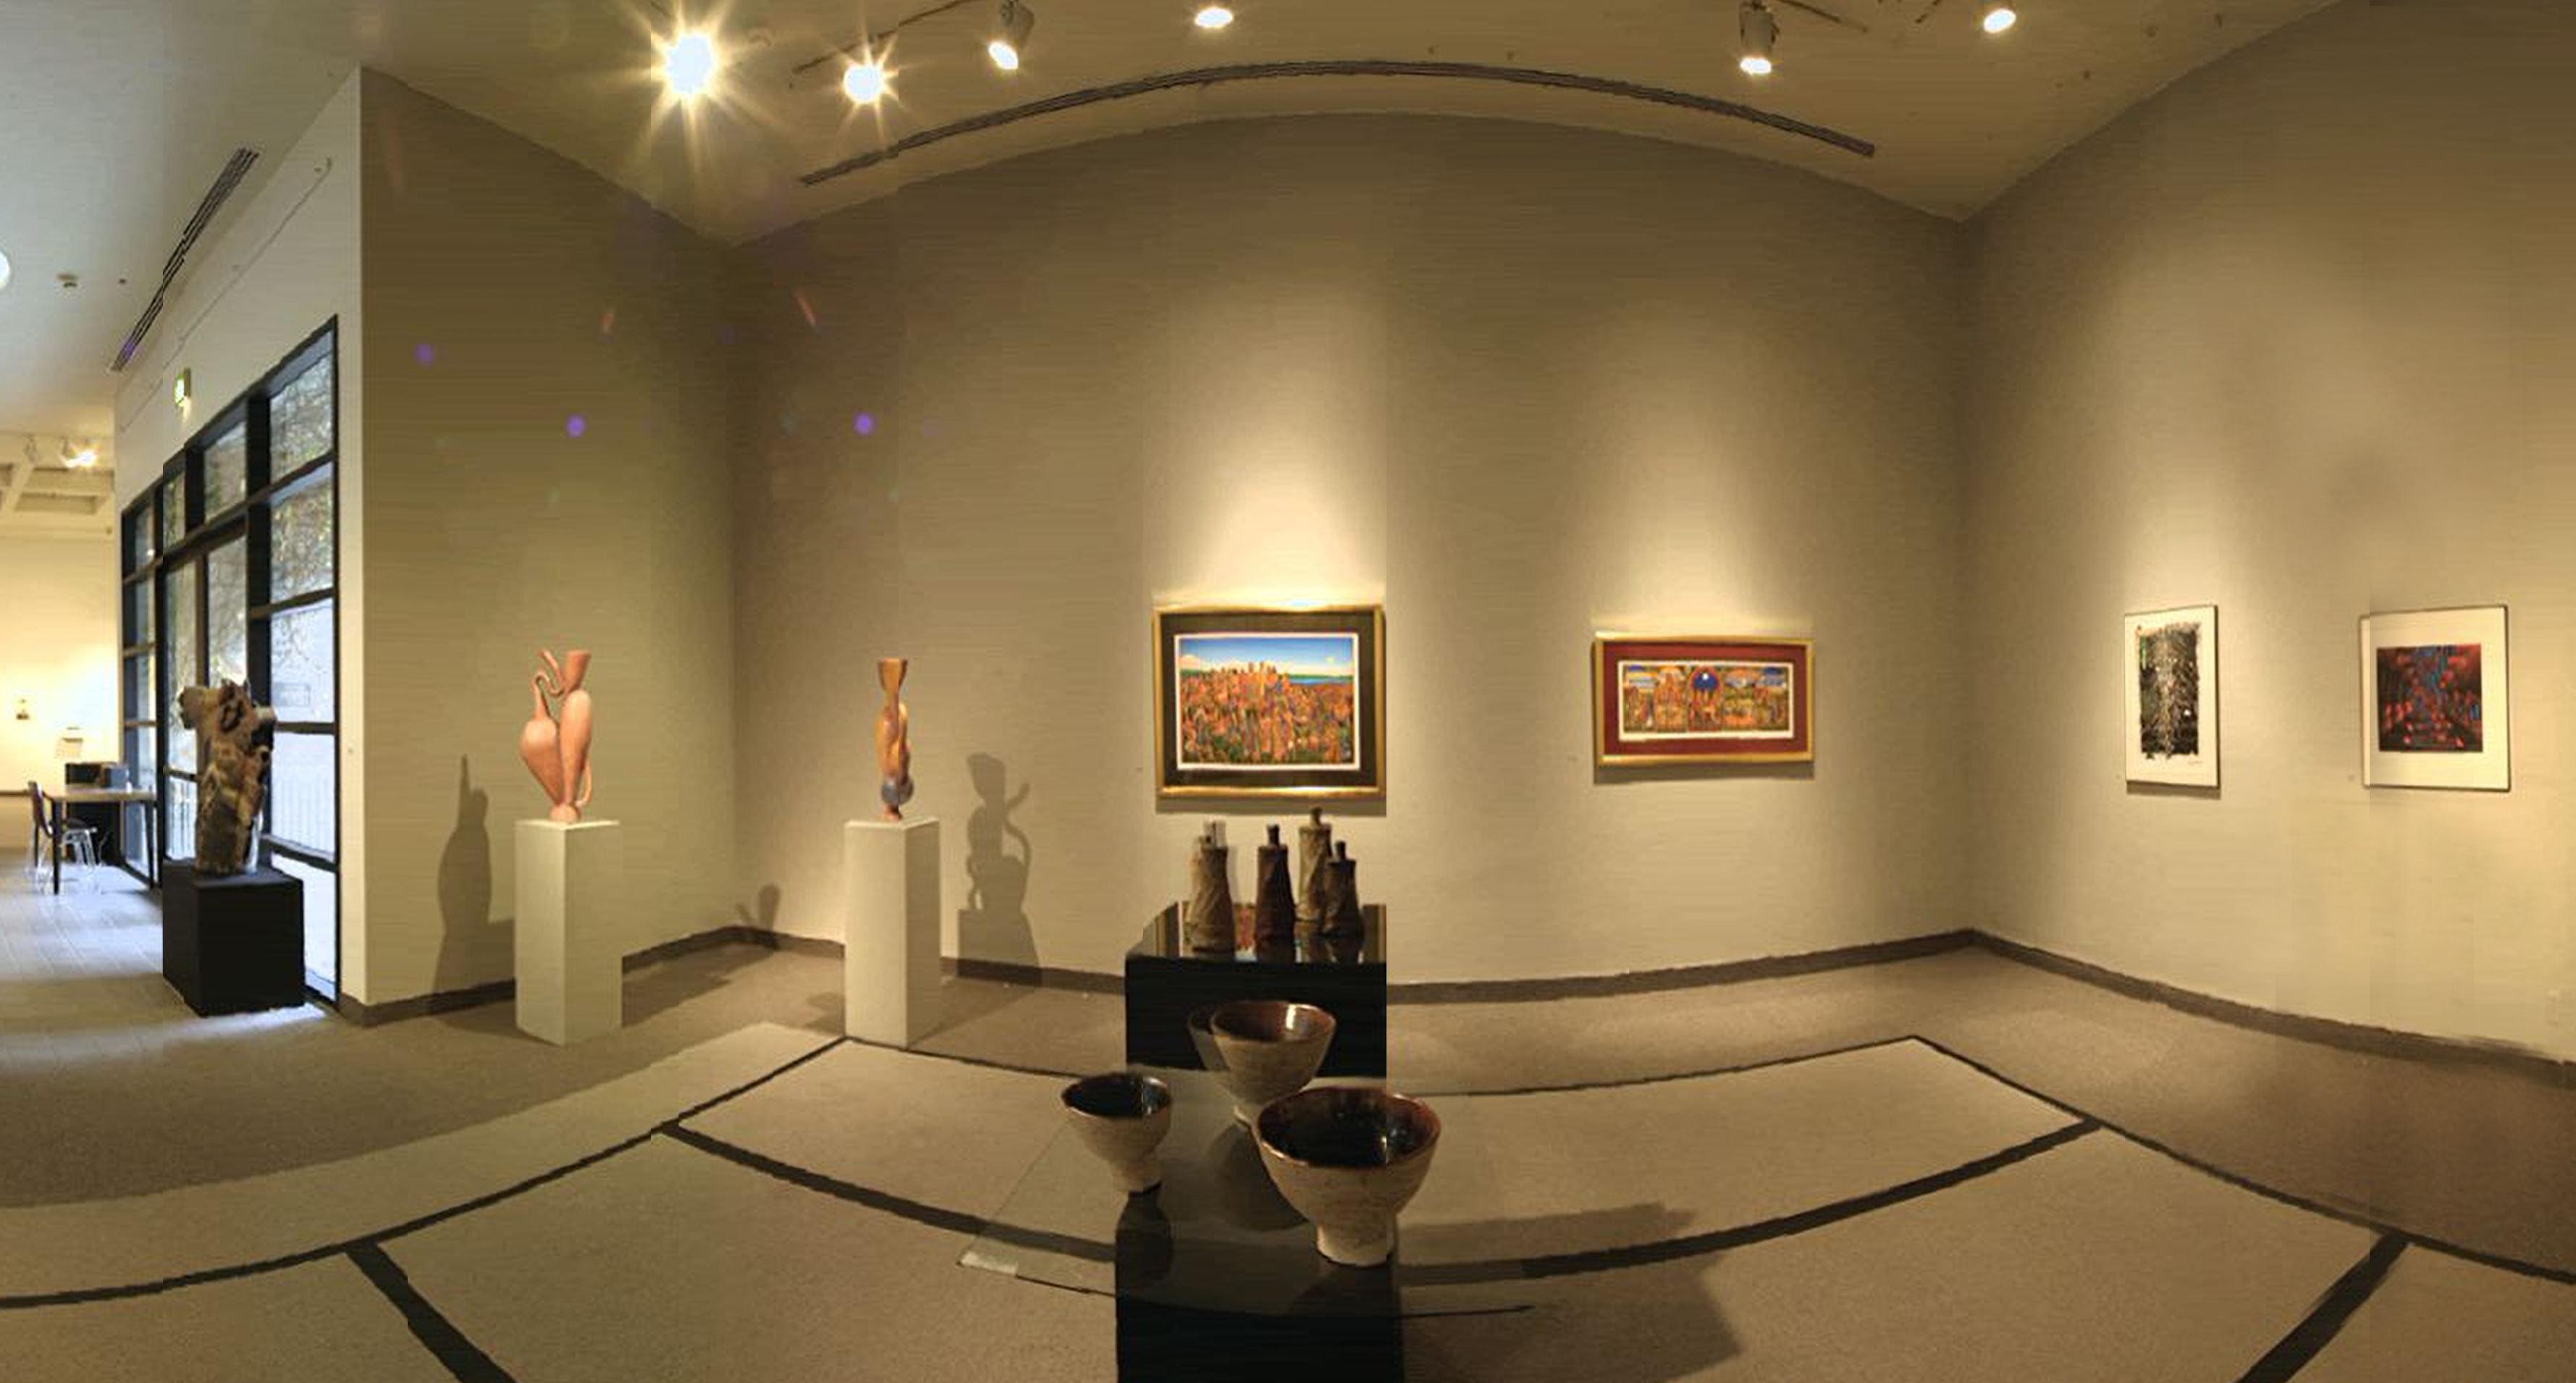 Installation View, Front West Gallery, Ink & Clay 31 Exhibition, January 07, 2005 to February 15, 2005